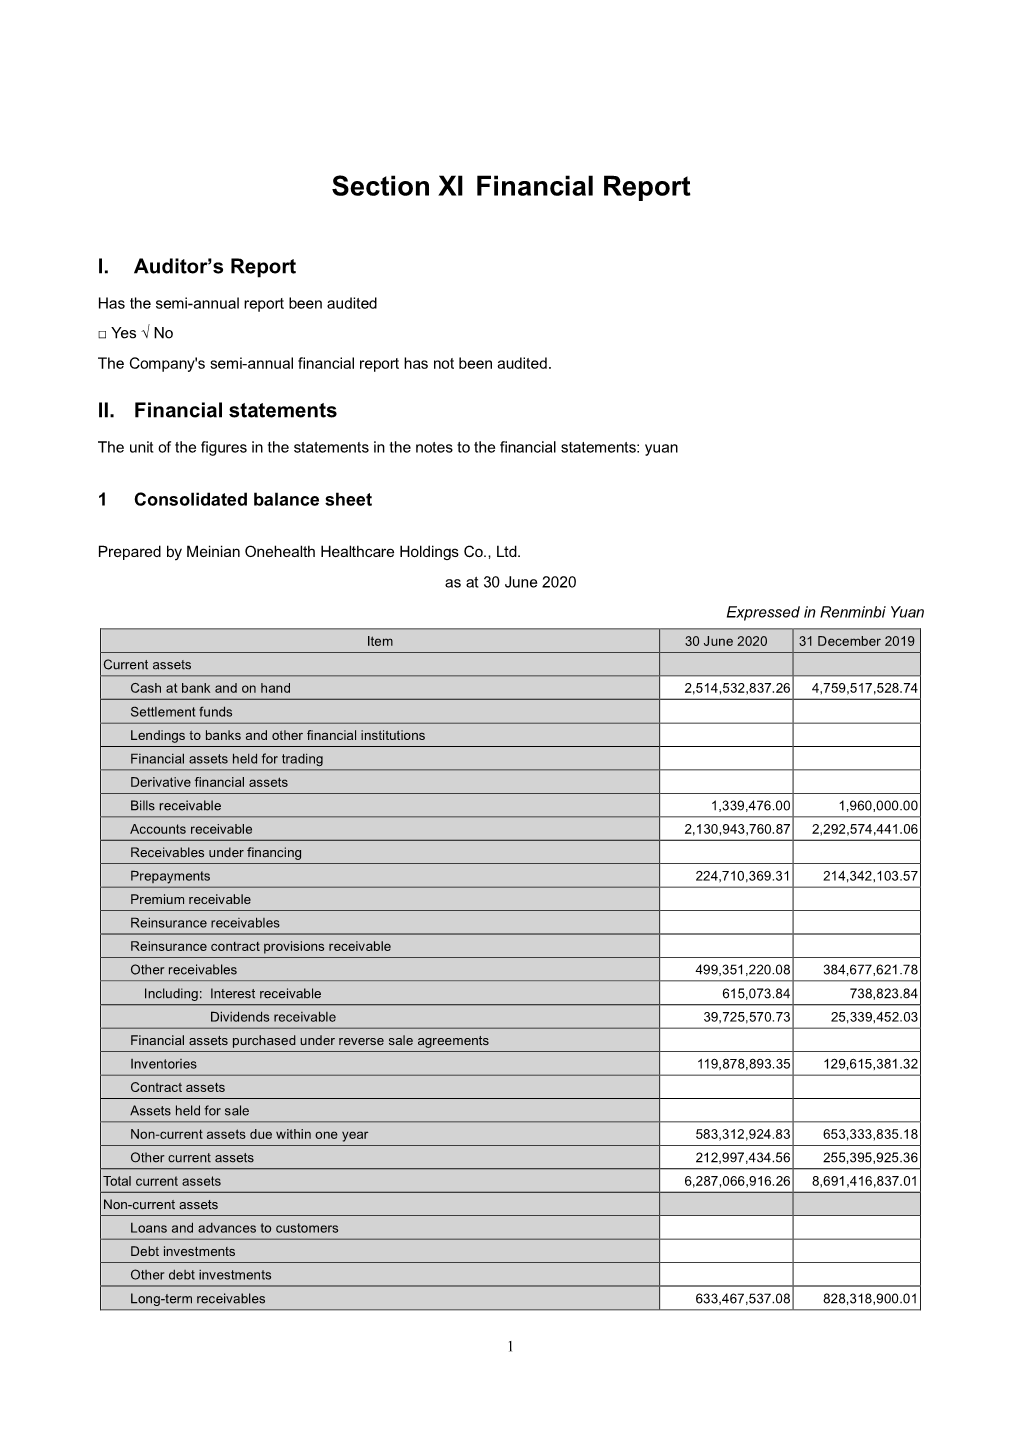 Section XI Financial Report